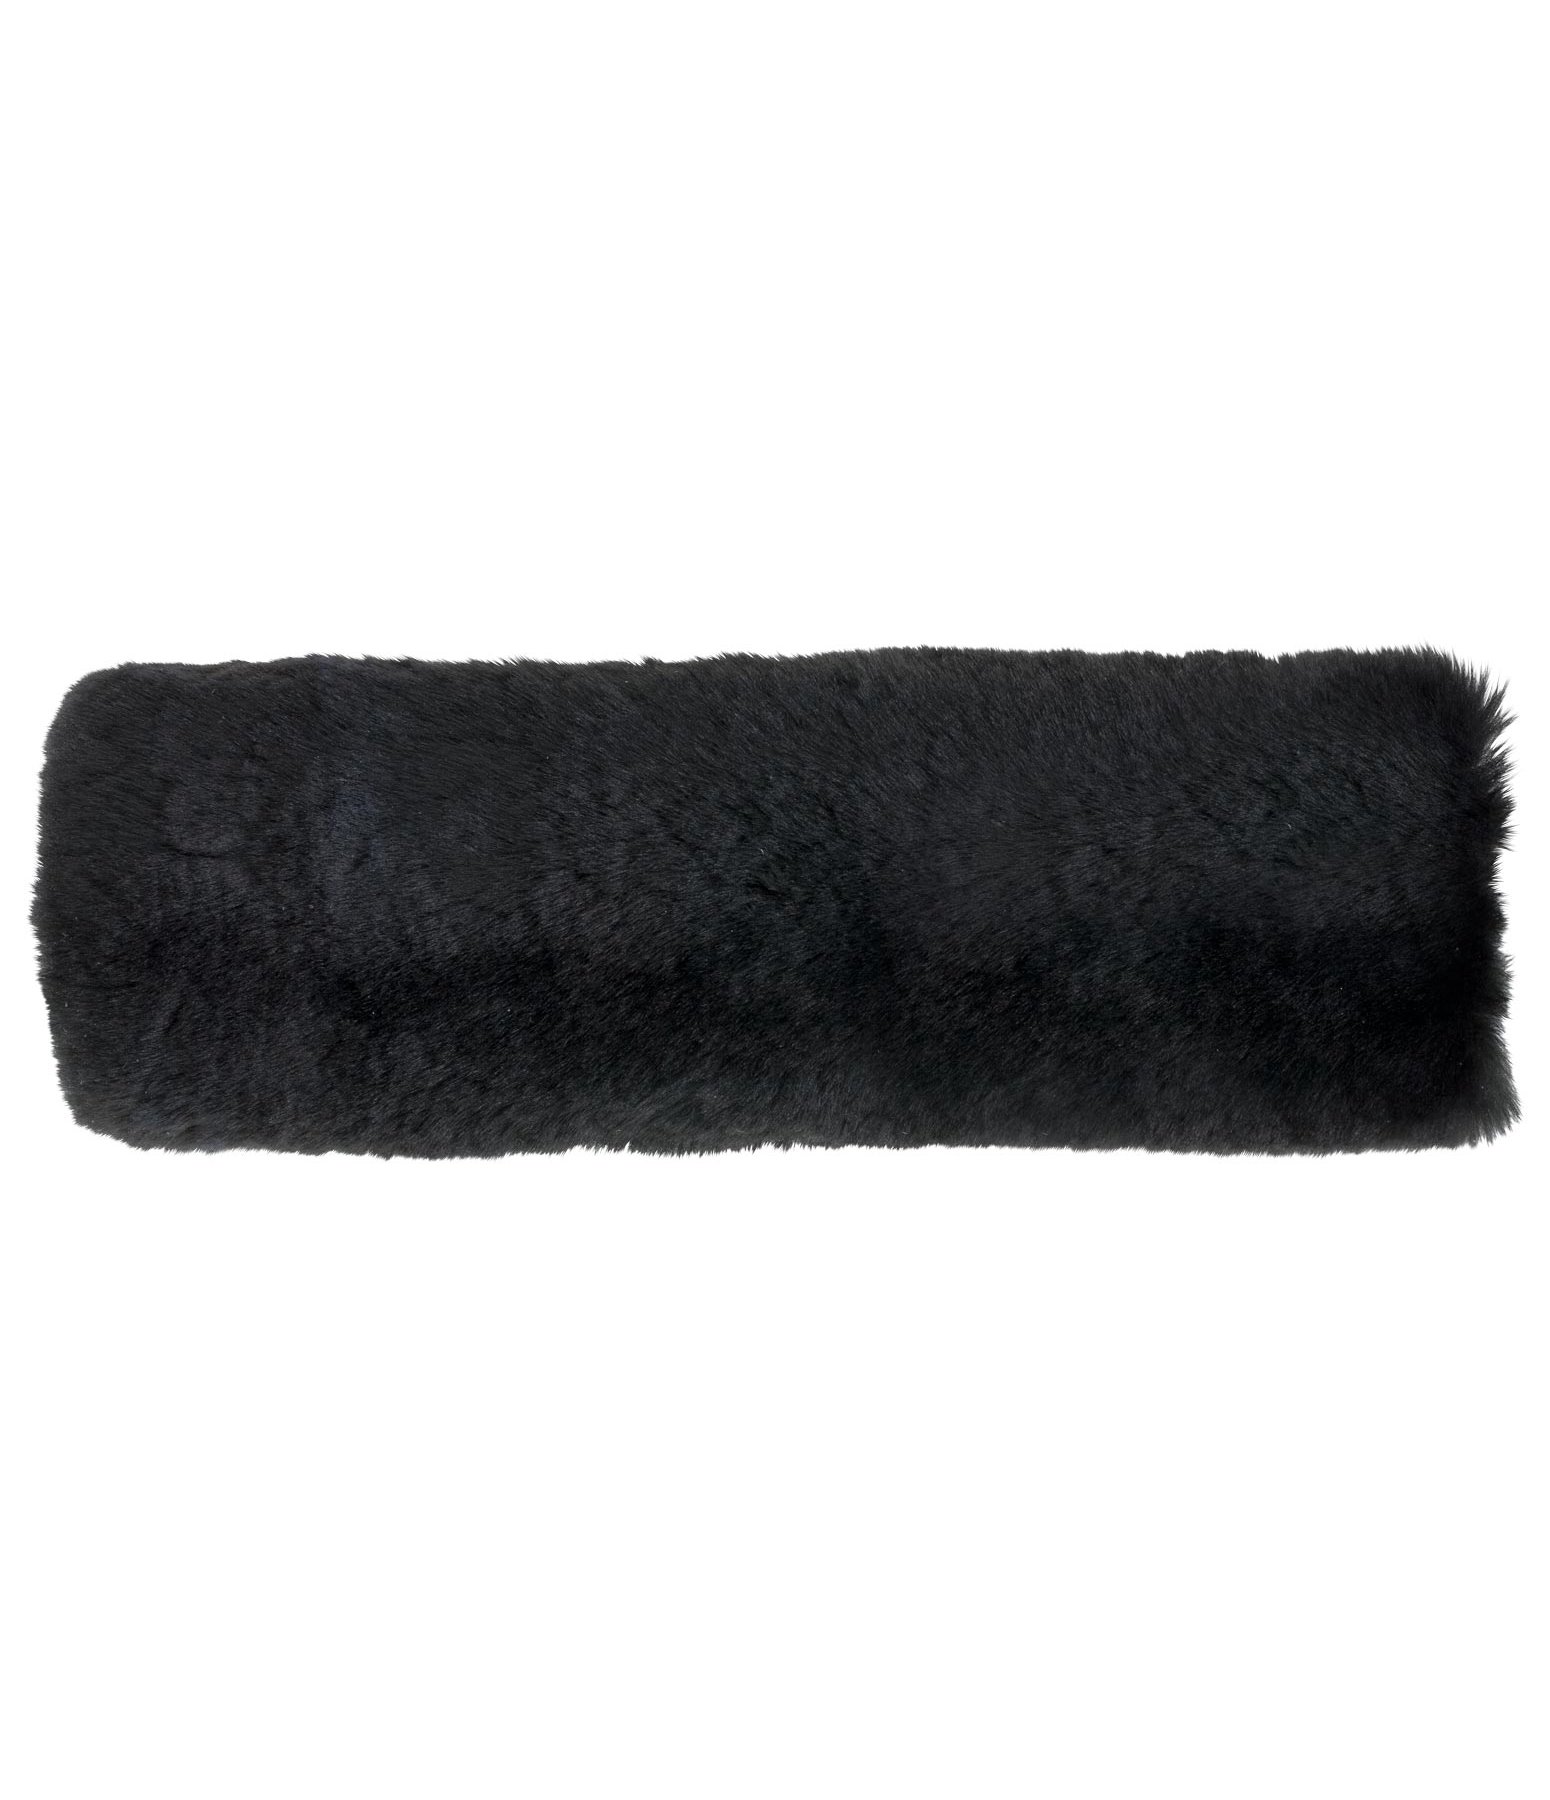 Sheepskin Poll and Nose Sleeve